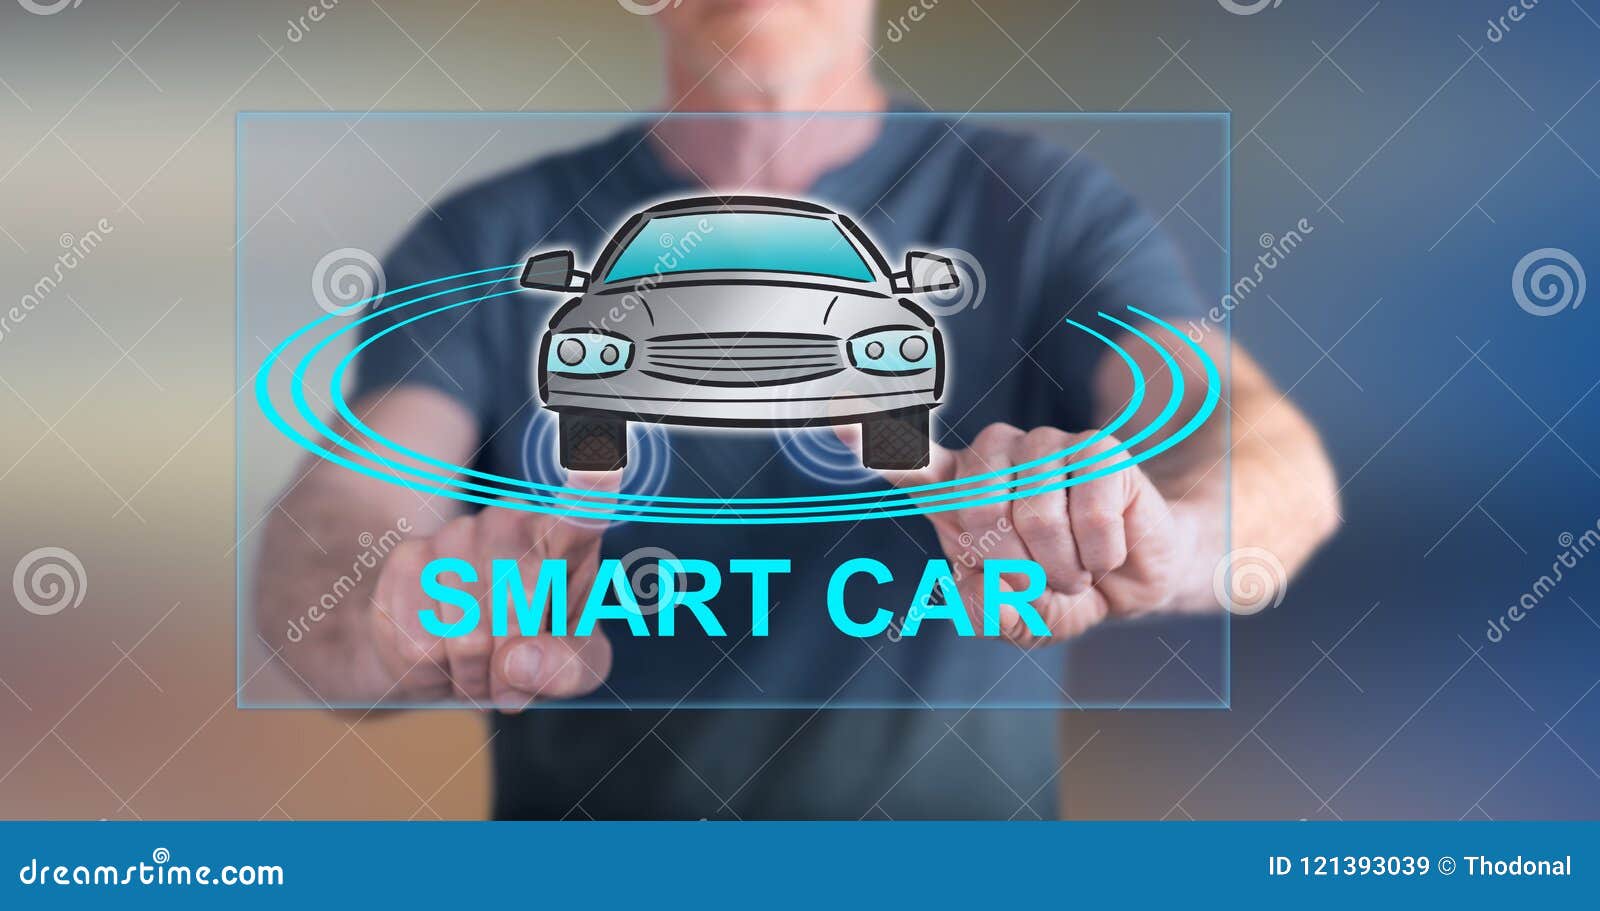 Man Touching a Smart Car Concept Stock Image - Image of auto, touch ...